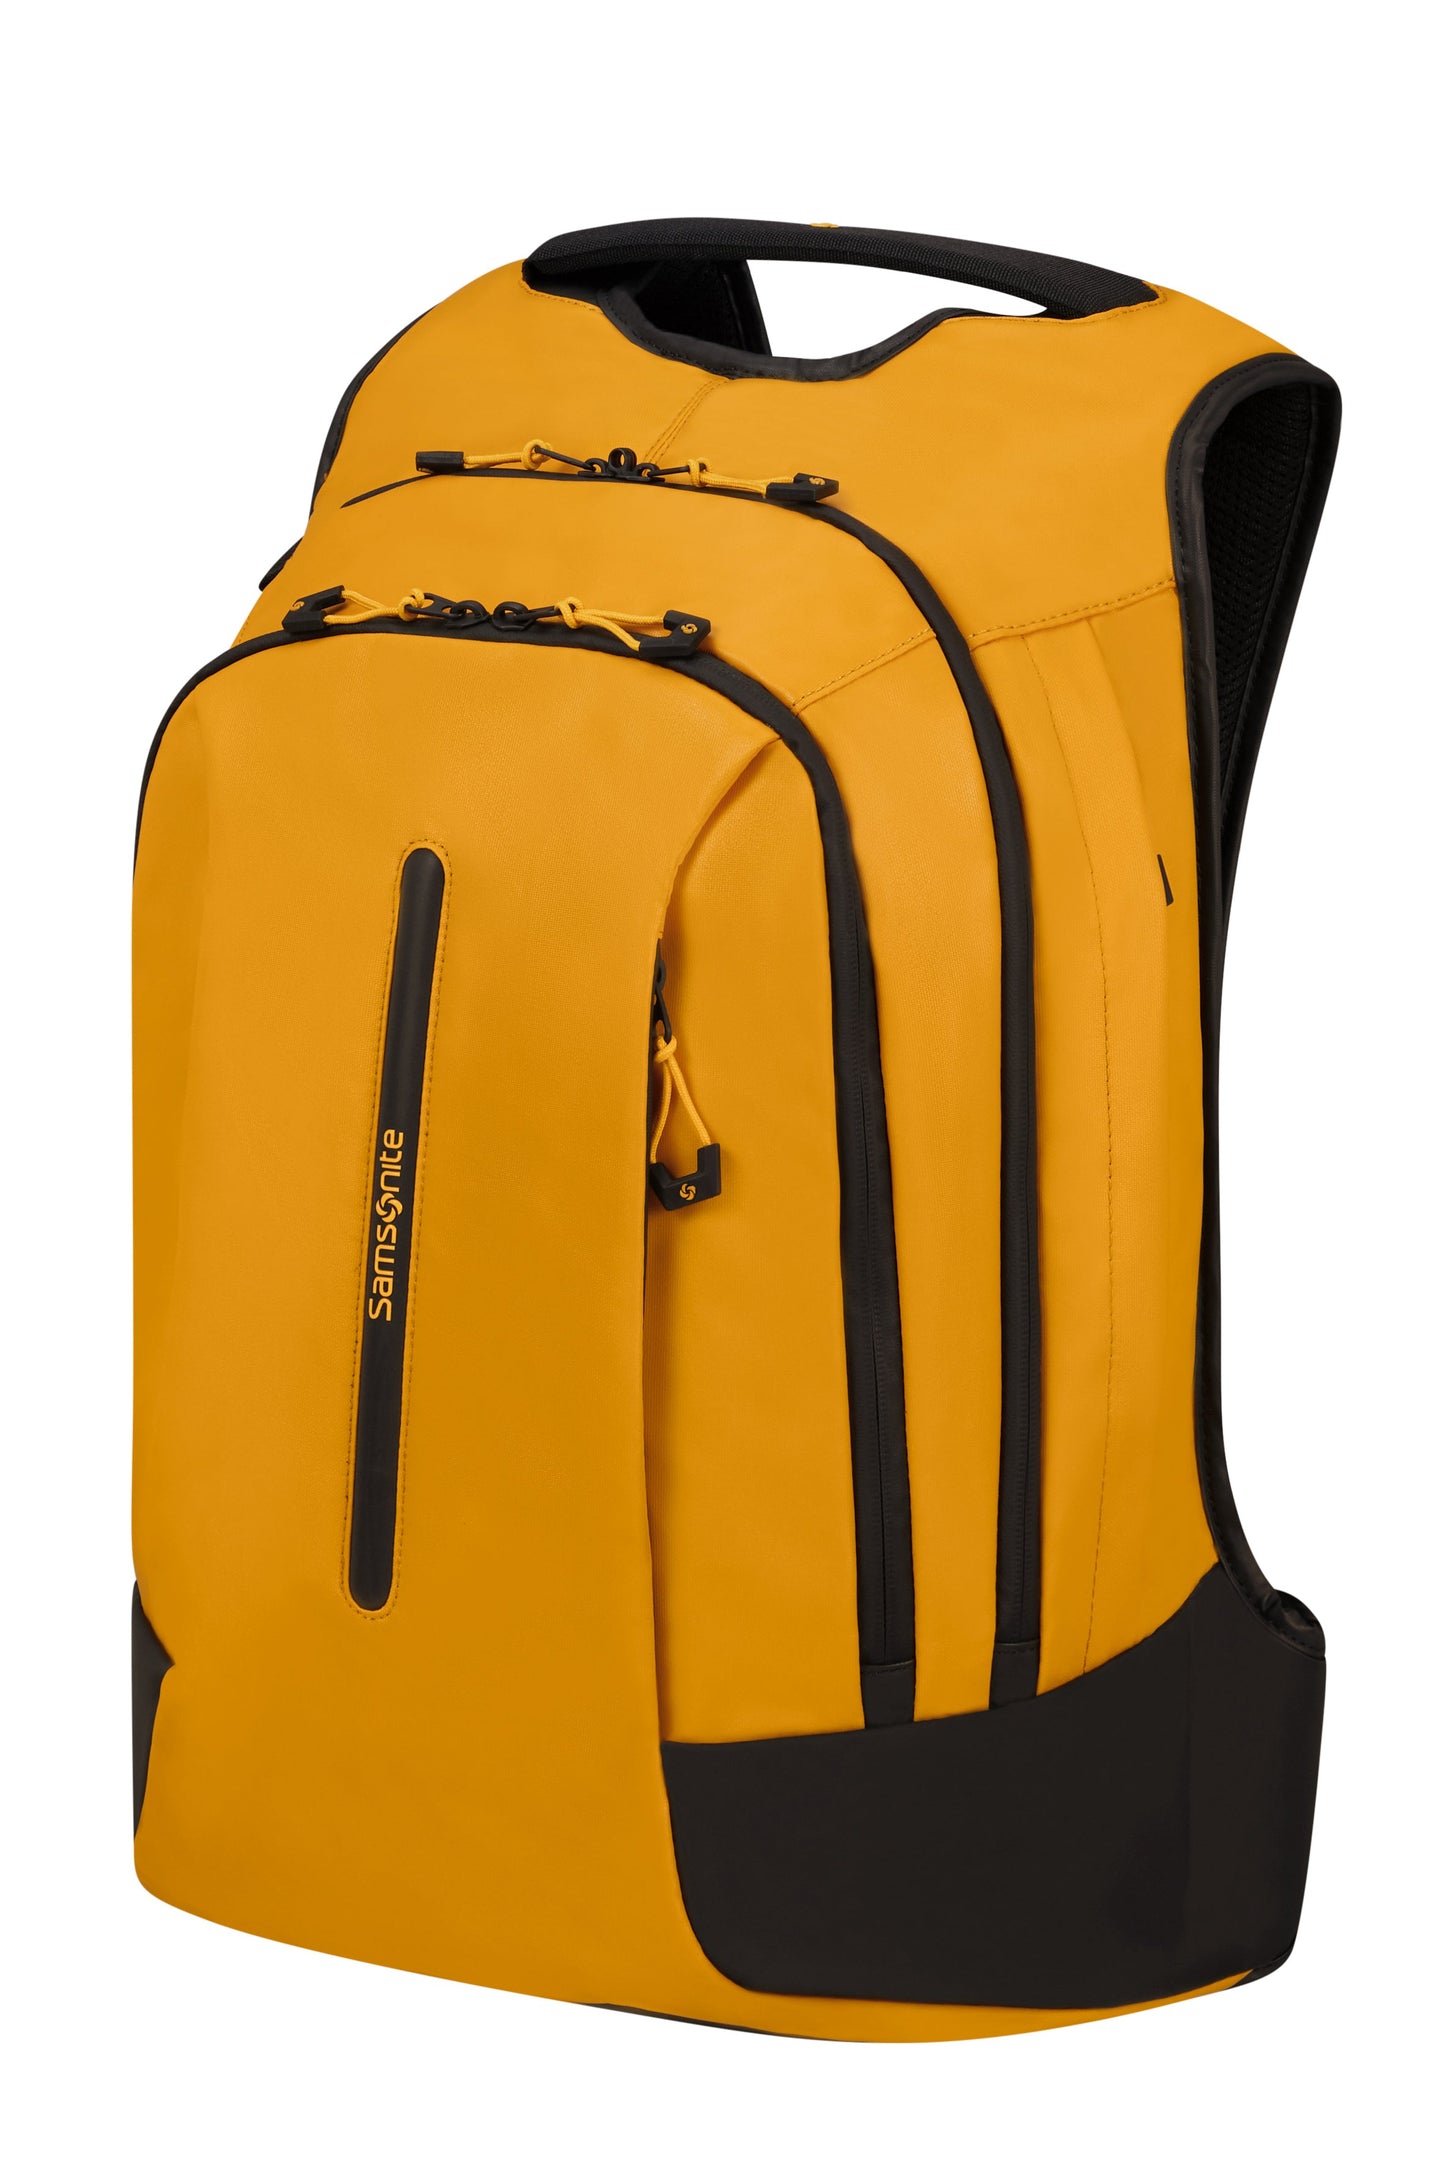 ECODIVER LAPTOP BACKPACK L von Samsonite - Laure Bags and Travel